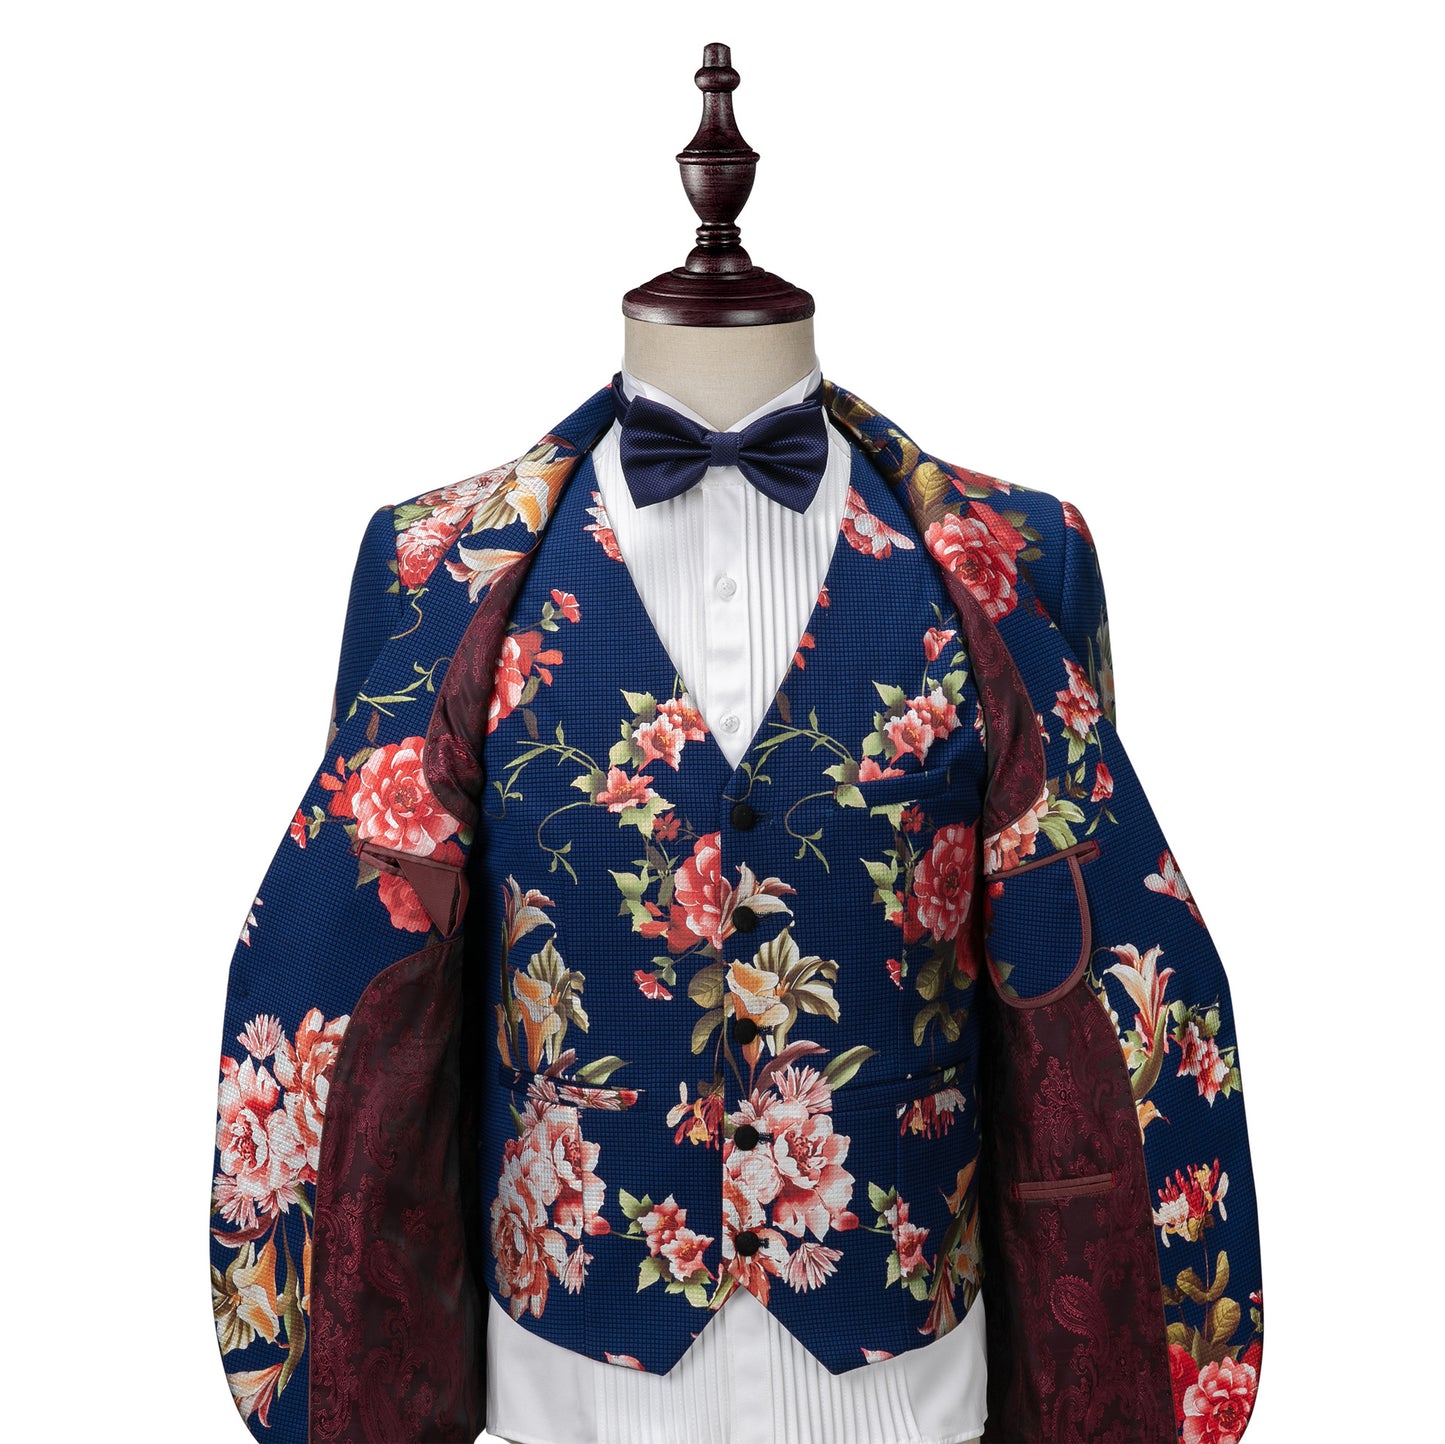 Men's printed dress suit three-piece suit for annual meeting performance